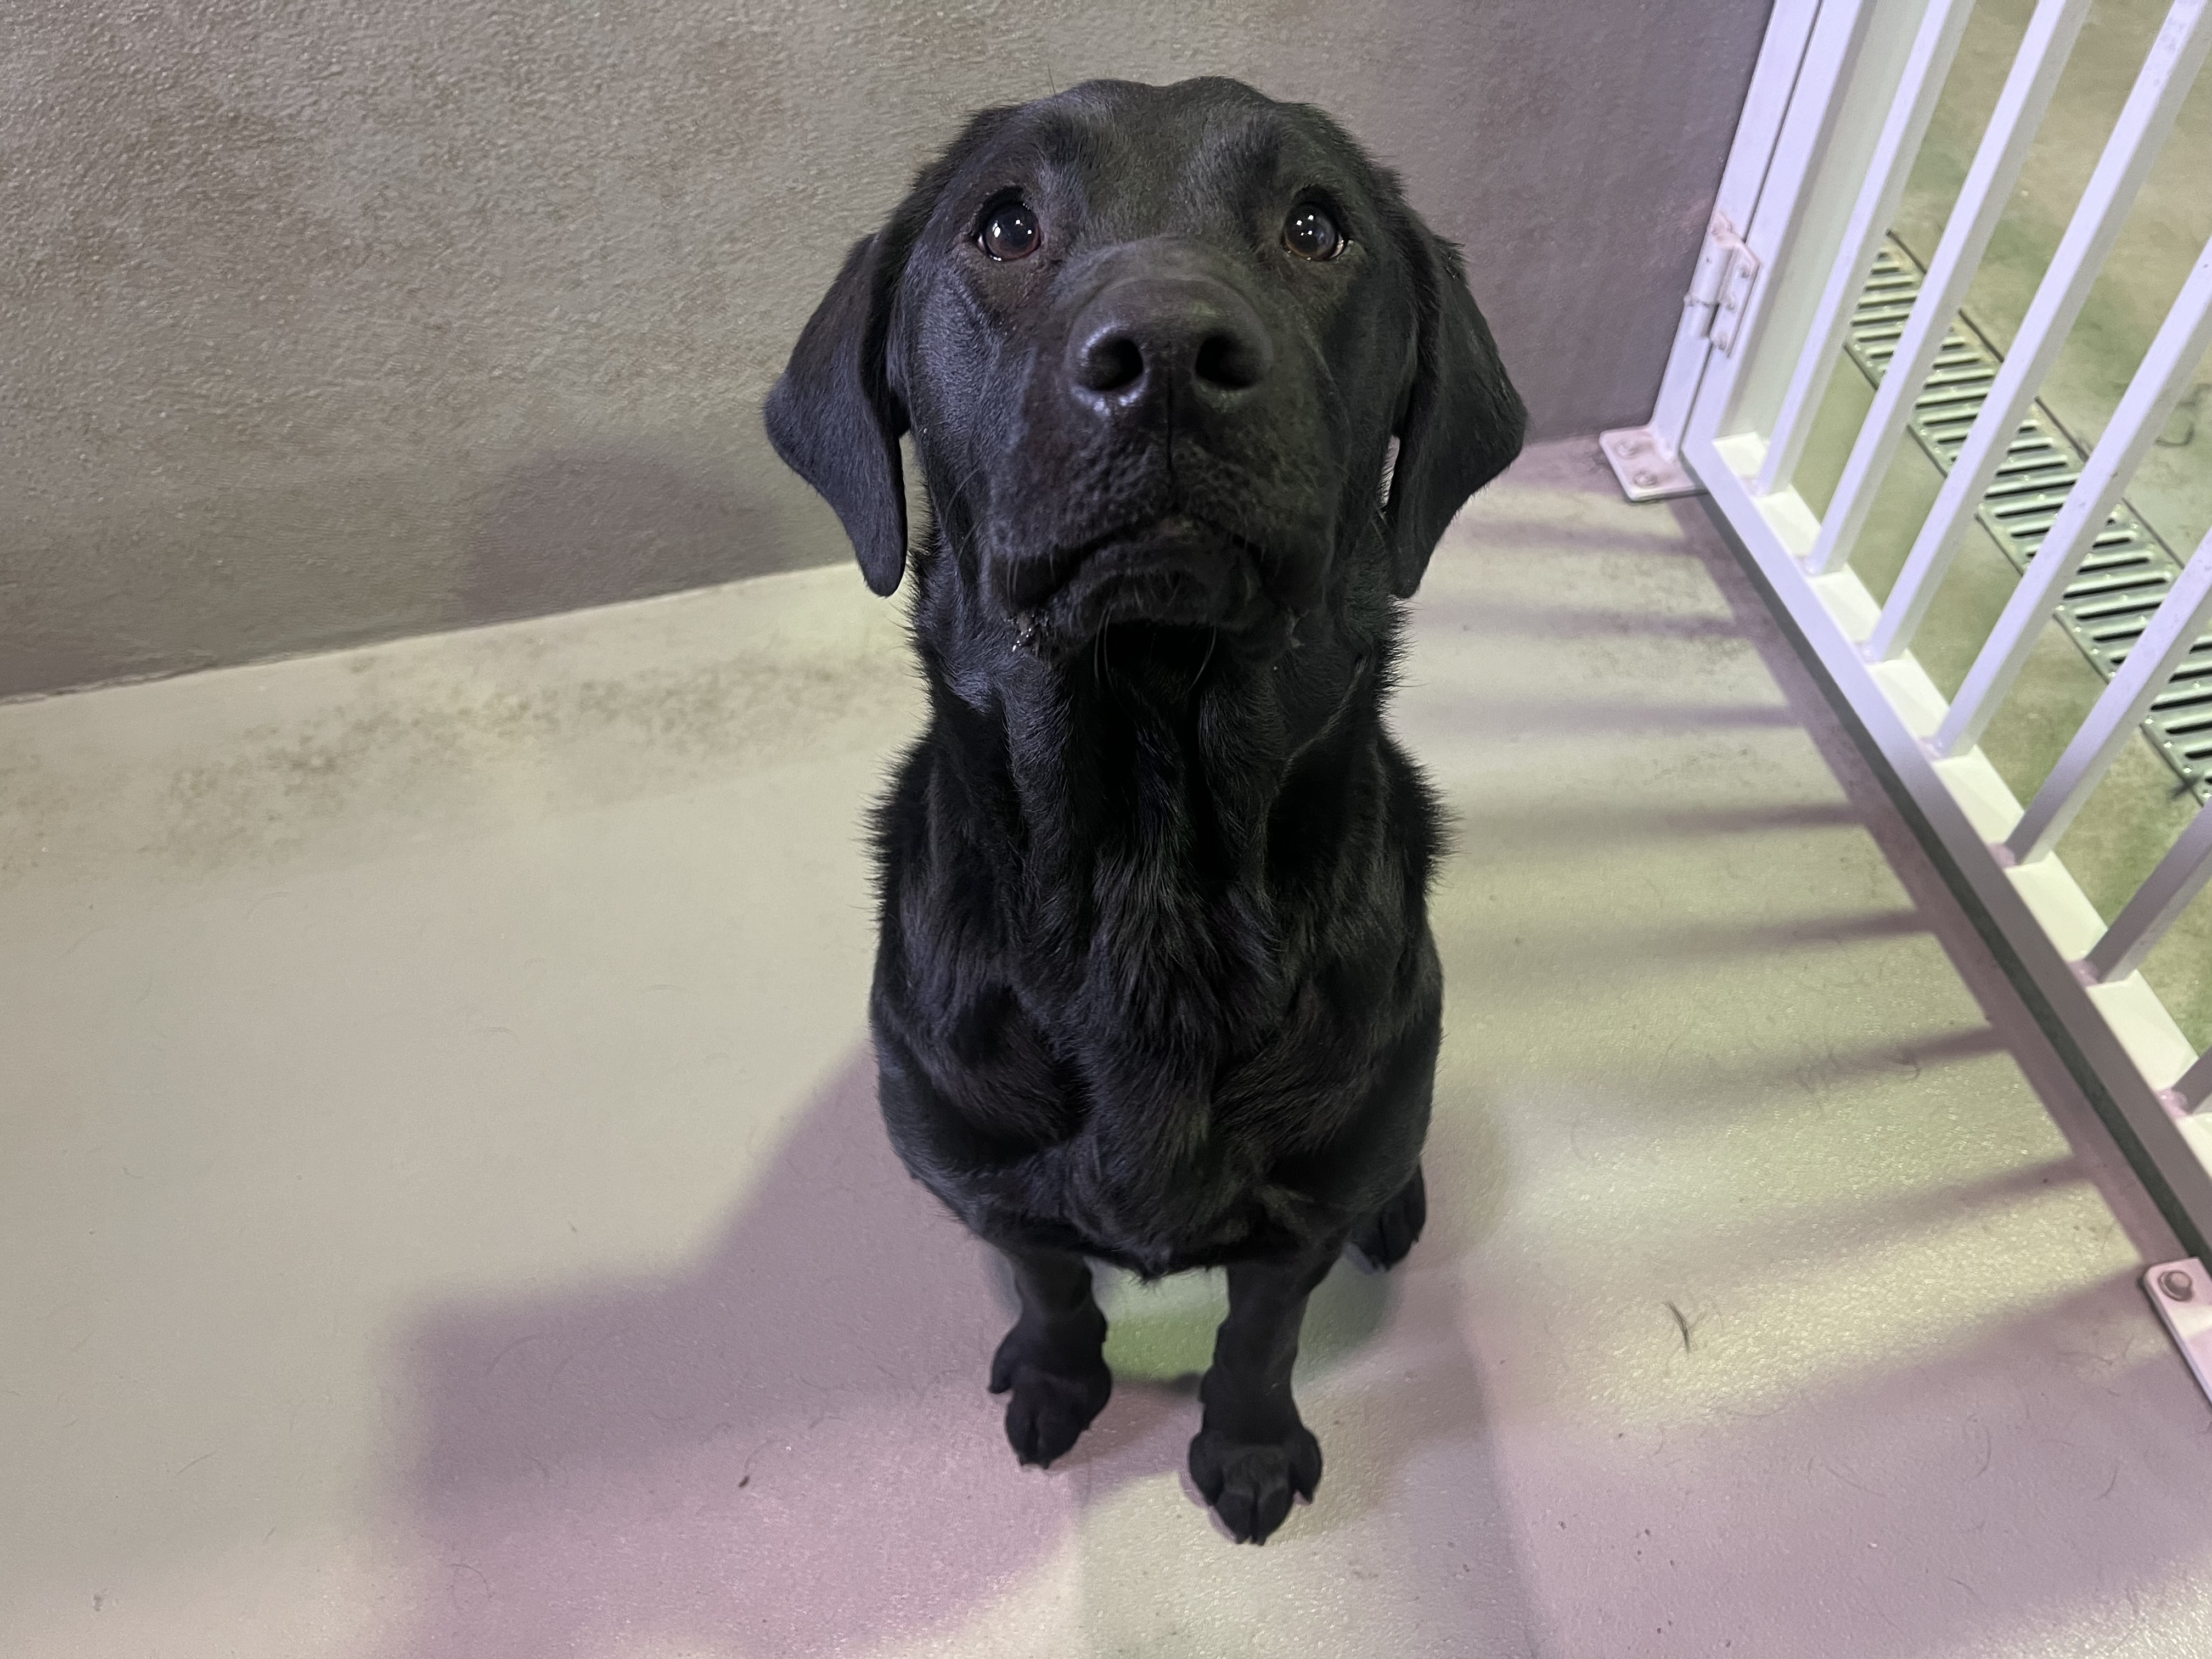 Labrador patiently sitting in her kennel